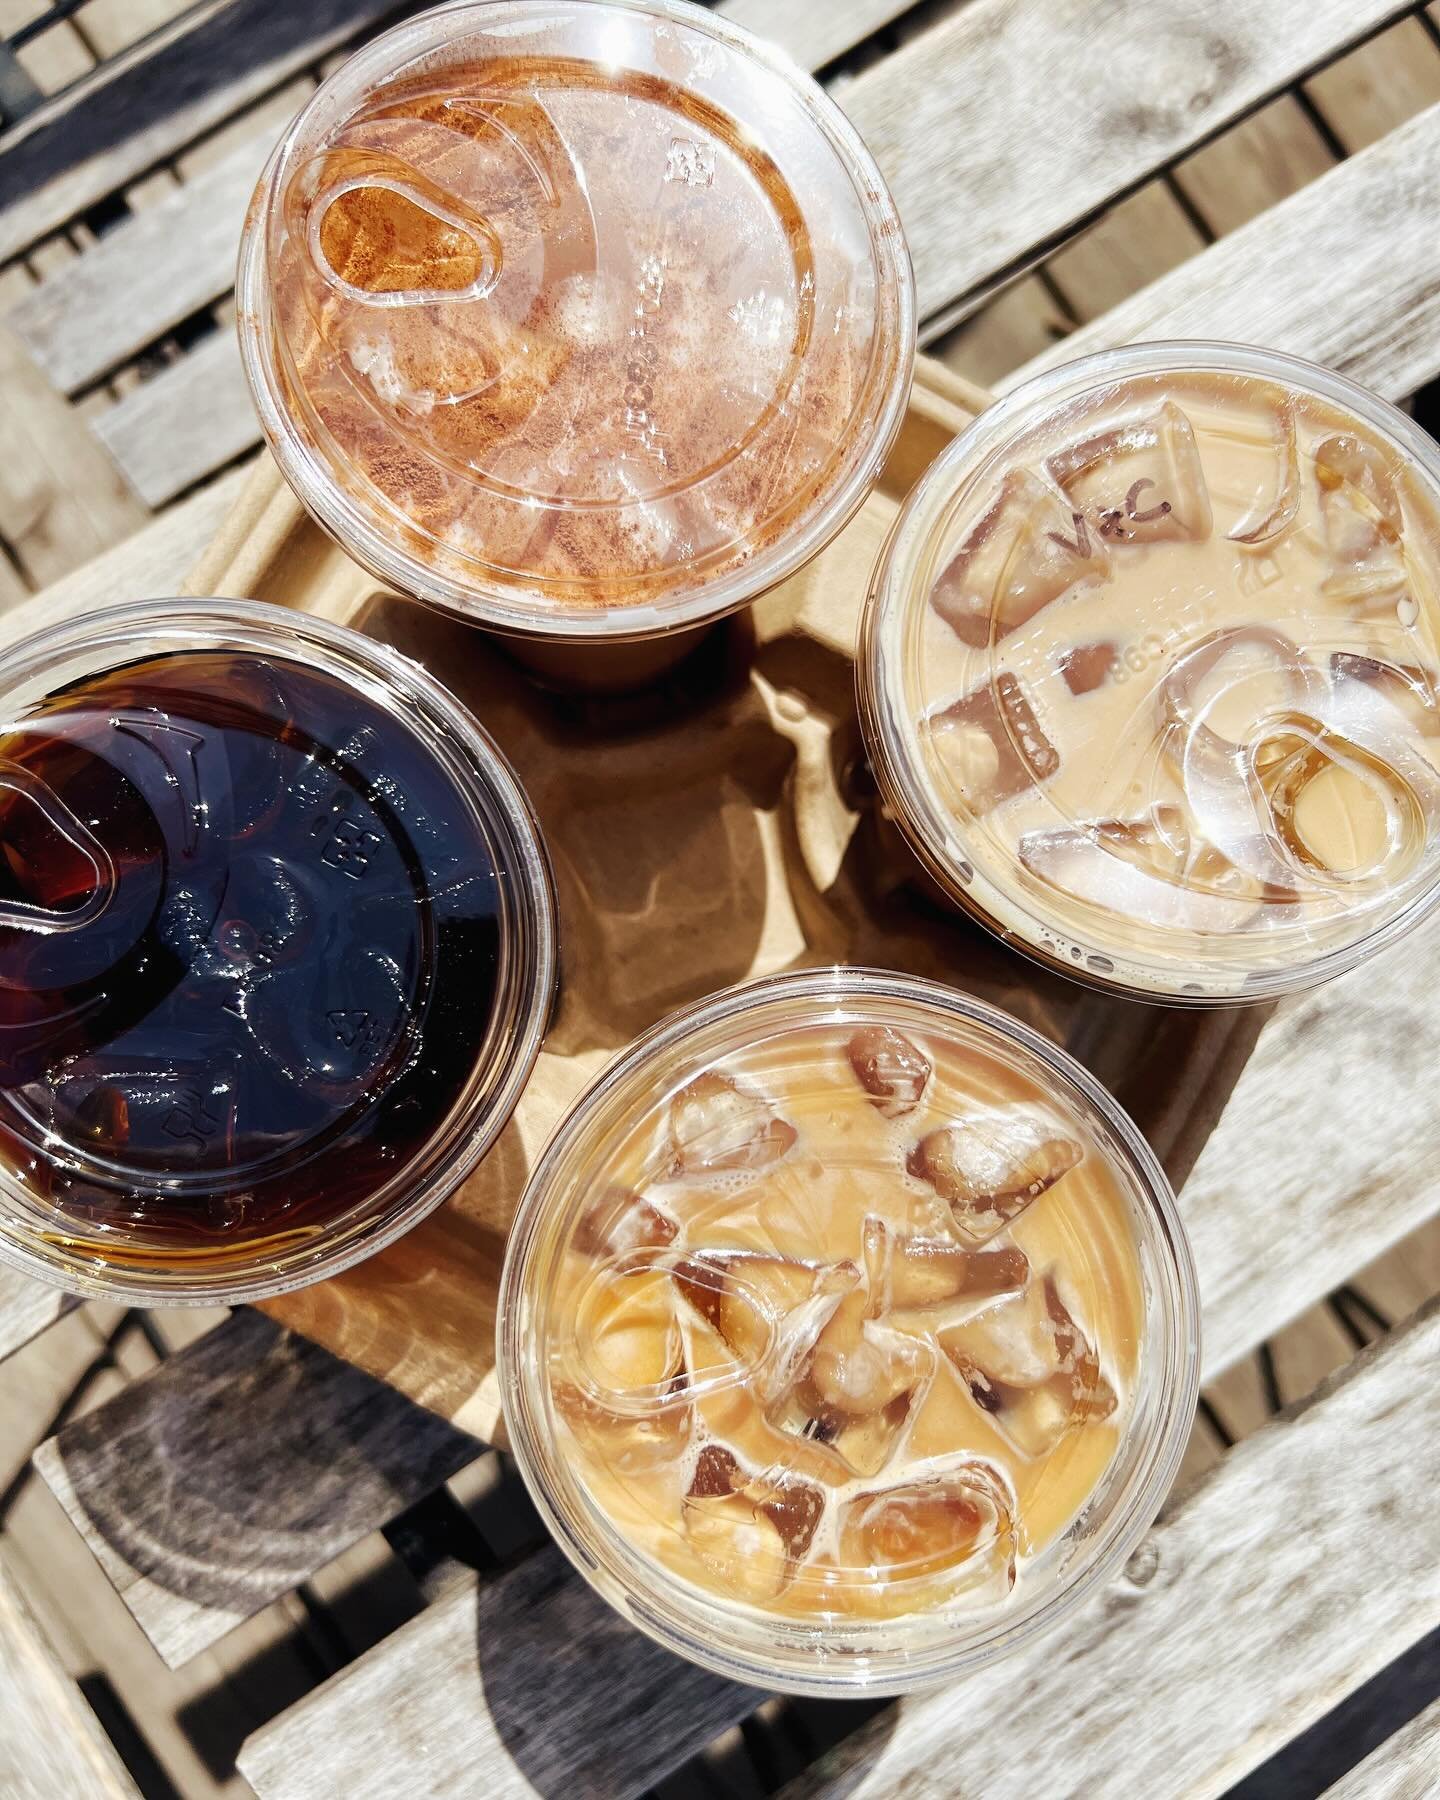 Did you know, you can order any of our specialty coffees iced? #icedcoffeeseason ☕️🧊

#icedcoffeeaddict #yegcafe #coffeetime #littlebrickyeg